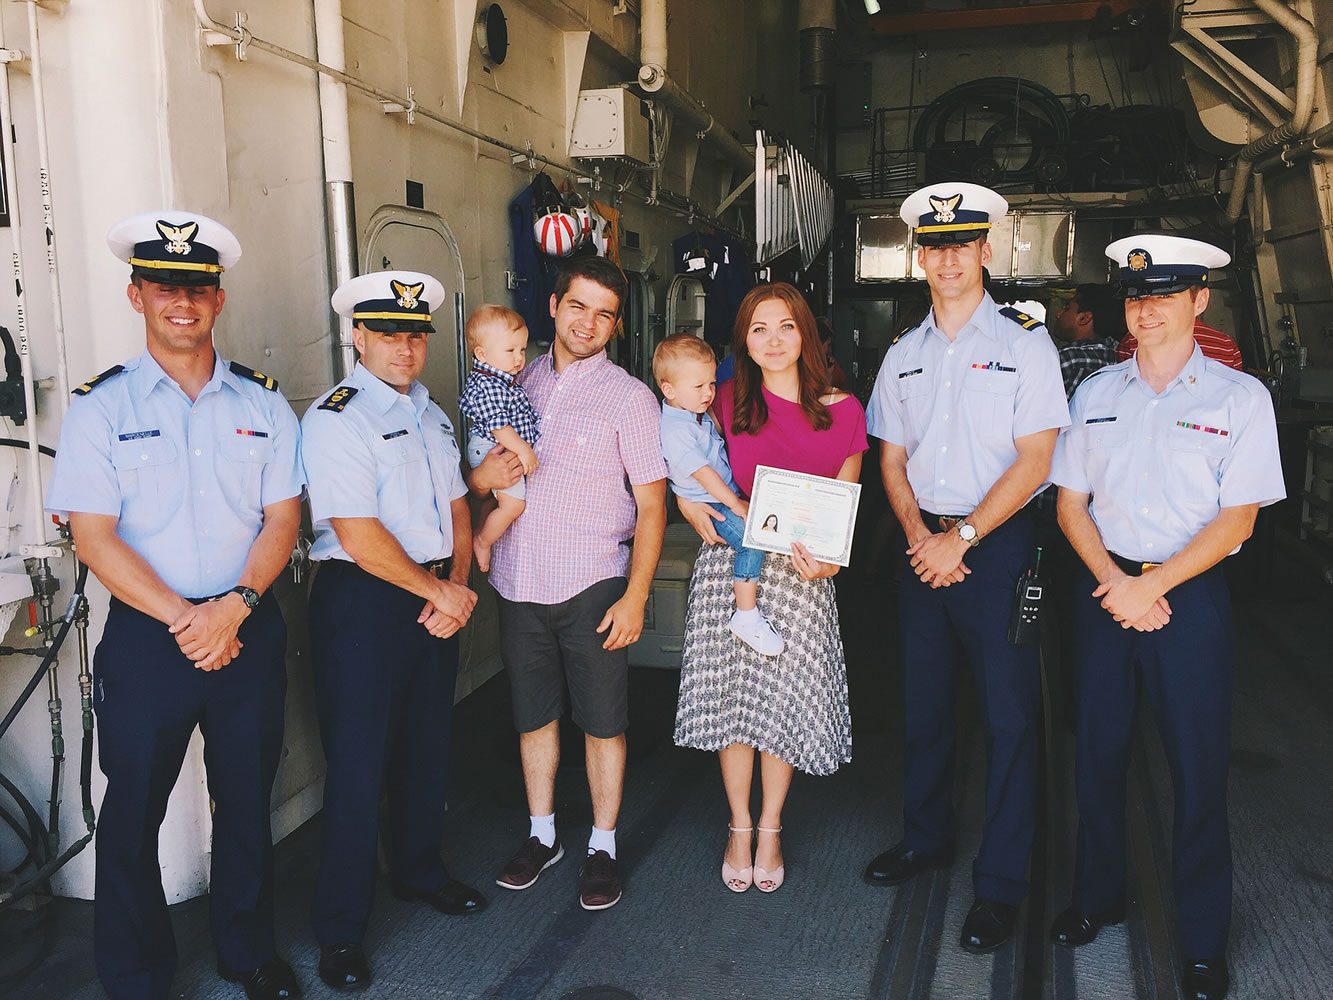 Zhanna Zakharov, center, attends a naturalization ceremony with her husband and two children on June 5 on the flight deck of the USCGC Waesche, where she was sworn in as a citizen after moving to America from Russia in 2009.